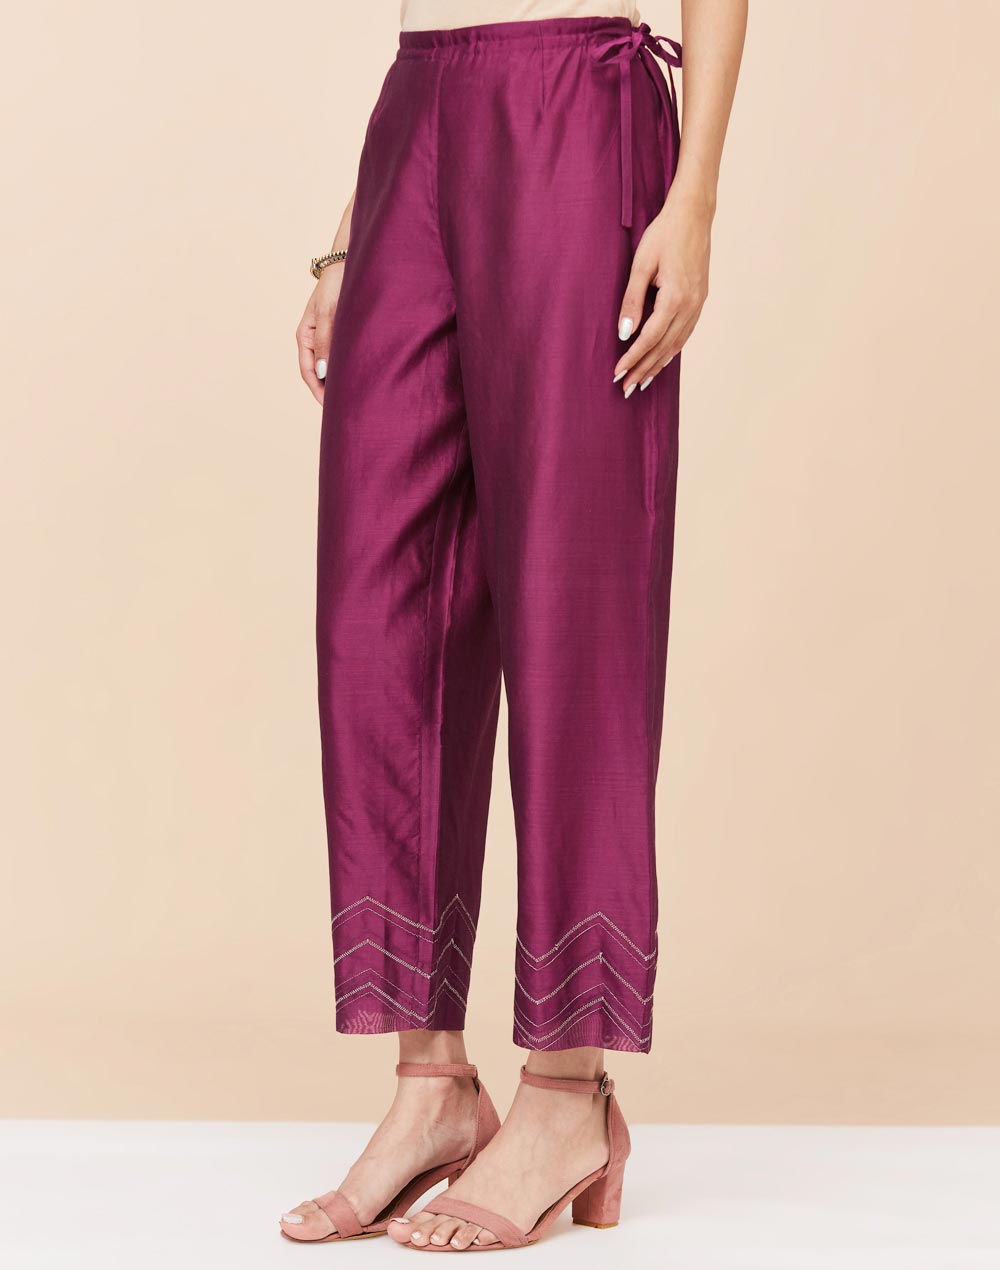 Buy Women's Pants, Palazzos and Skirts, Bottom wear for Women at Fabindia